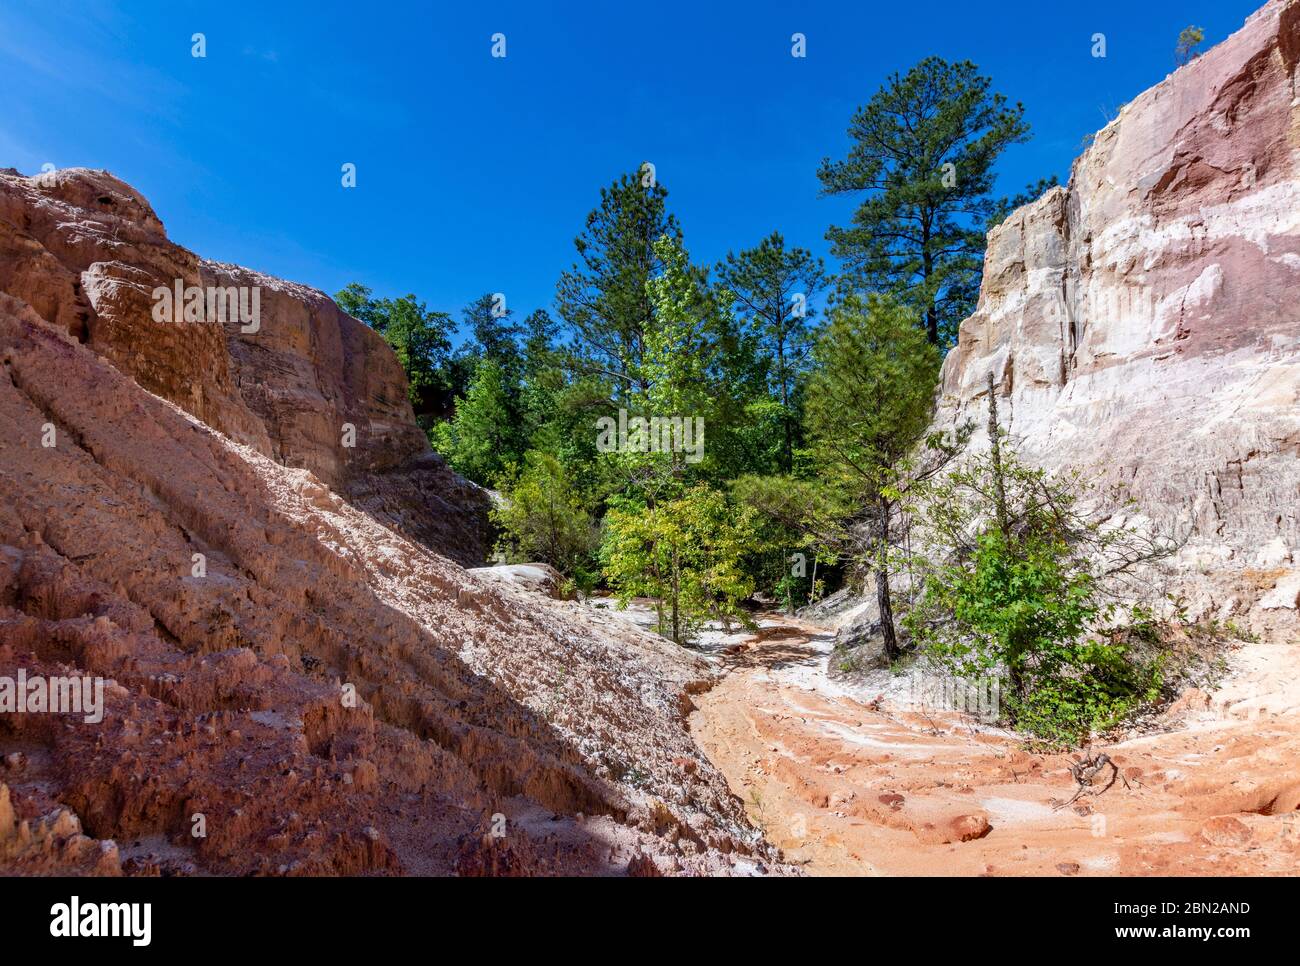 Pine trees growing along the canyon floor at Providence canyon state park Stock Photo